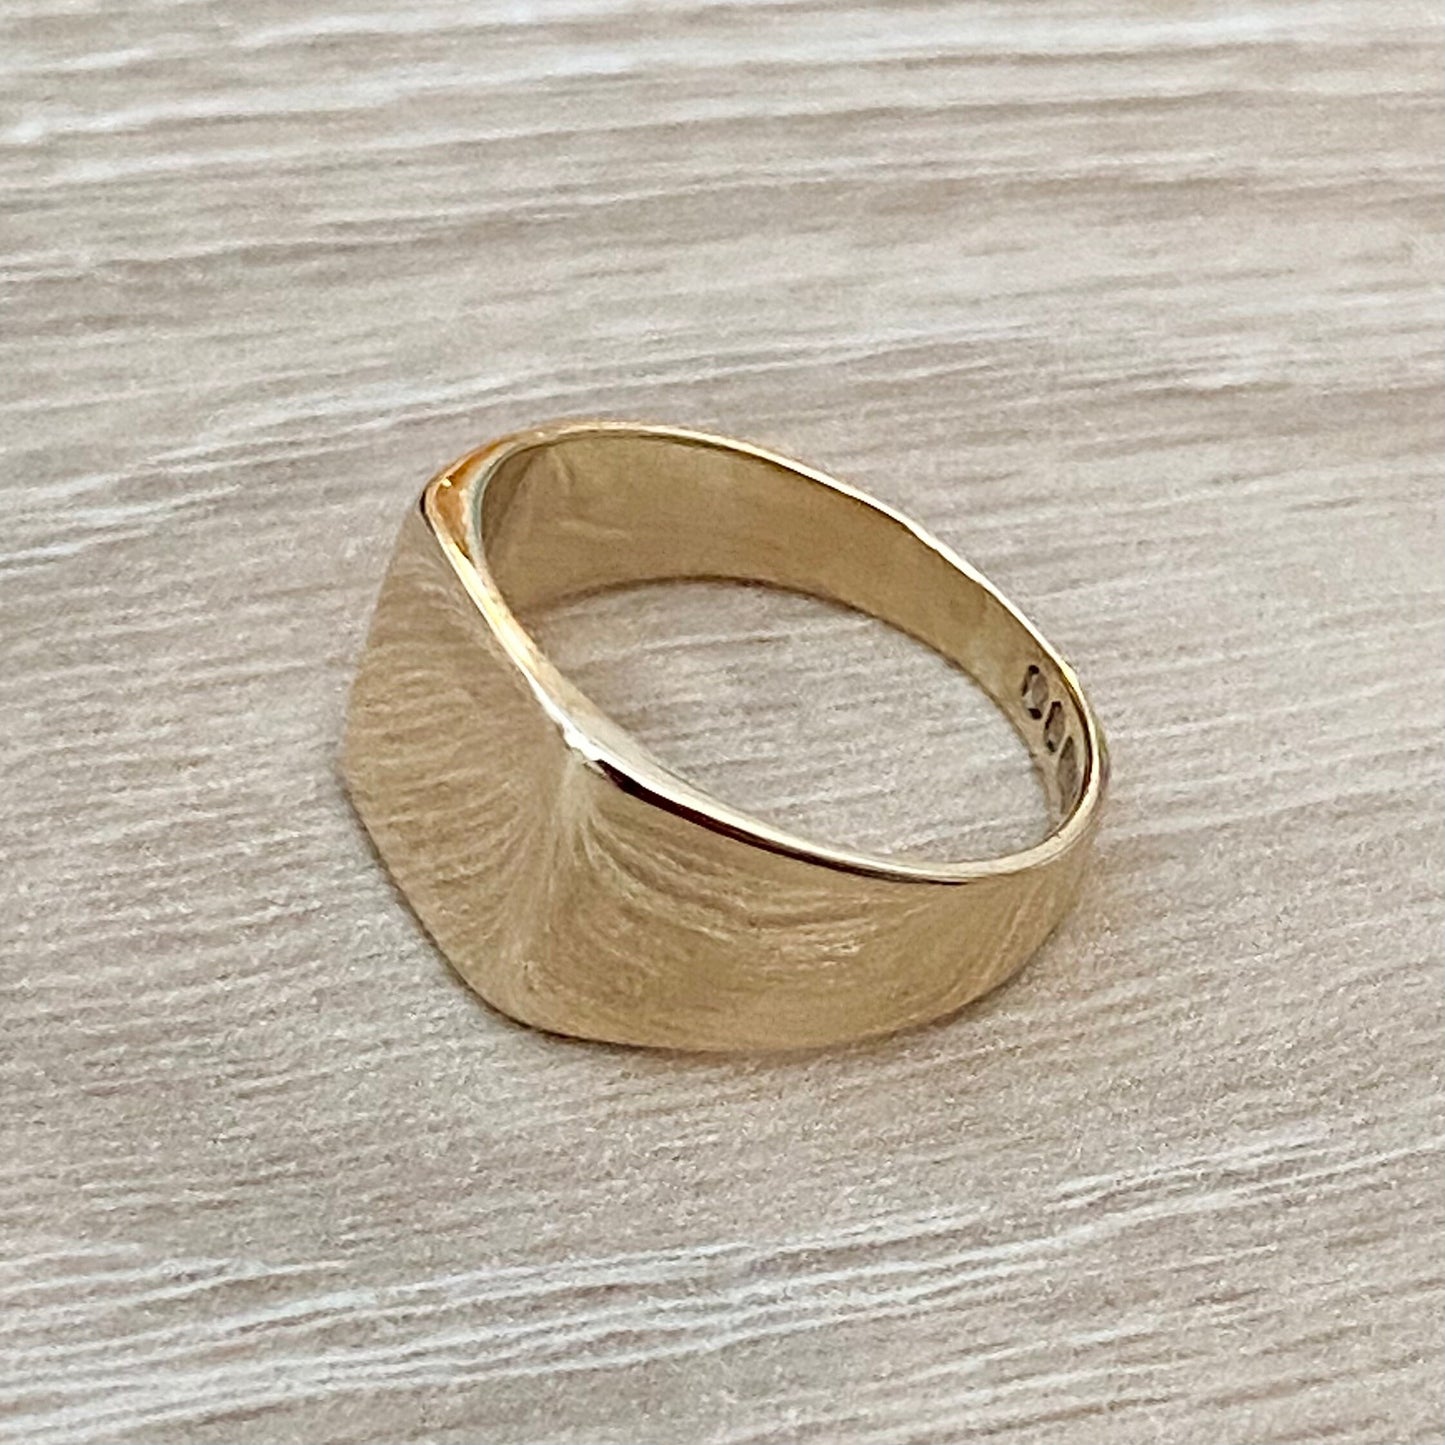 Vintage 9ct yellow gold square signet ring